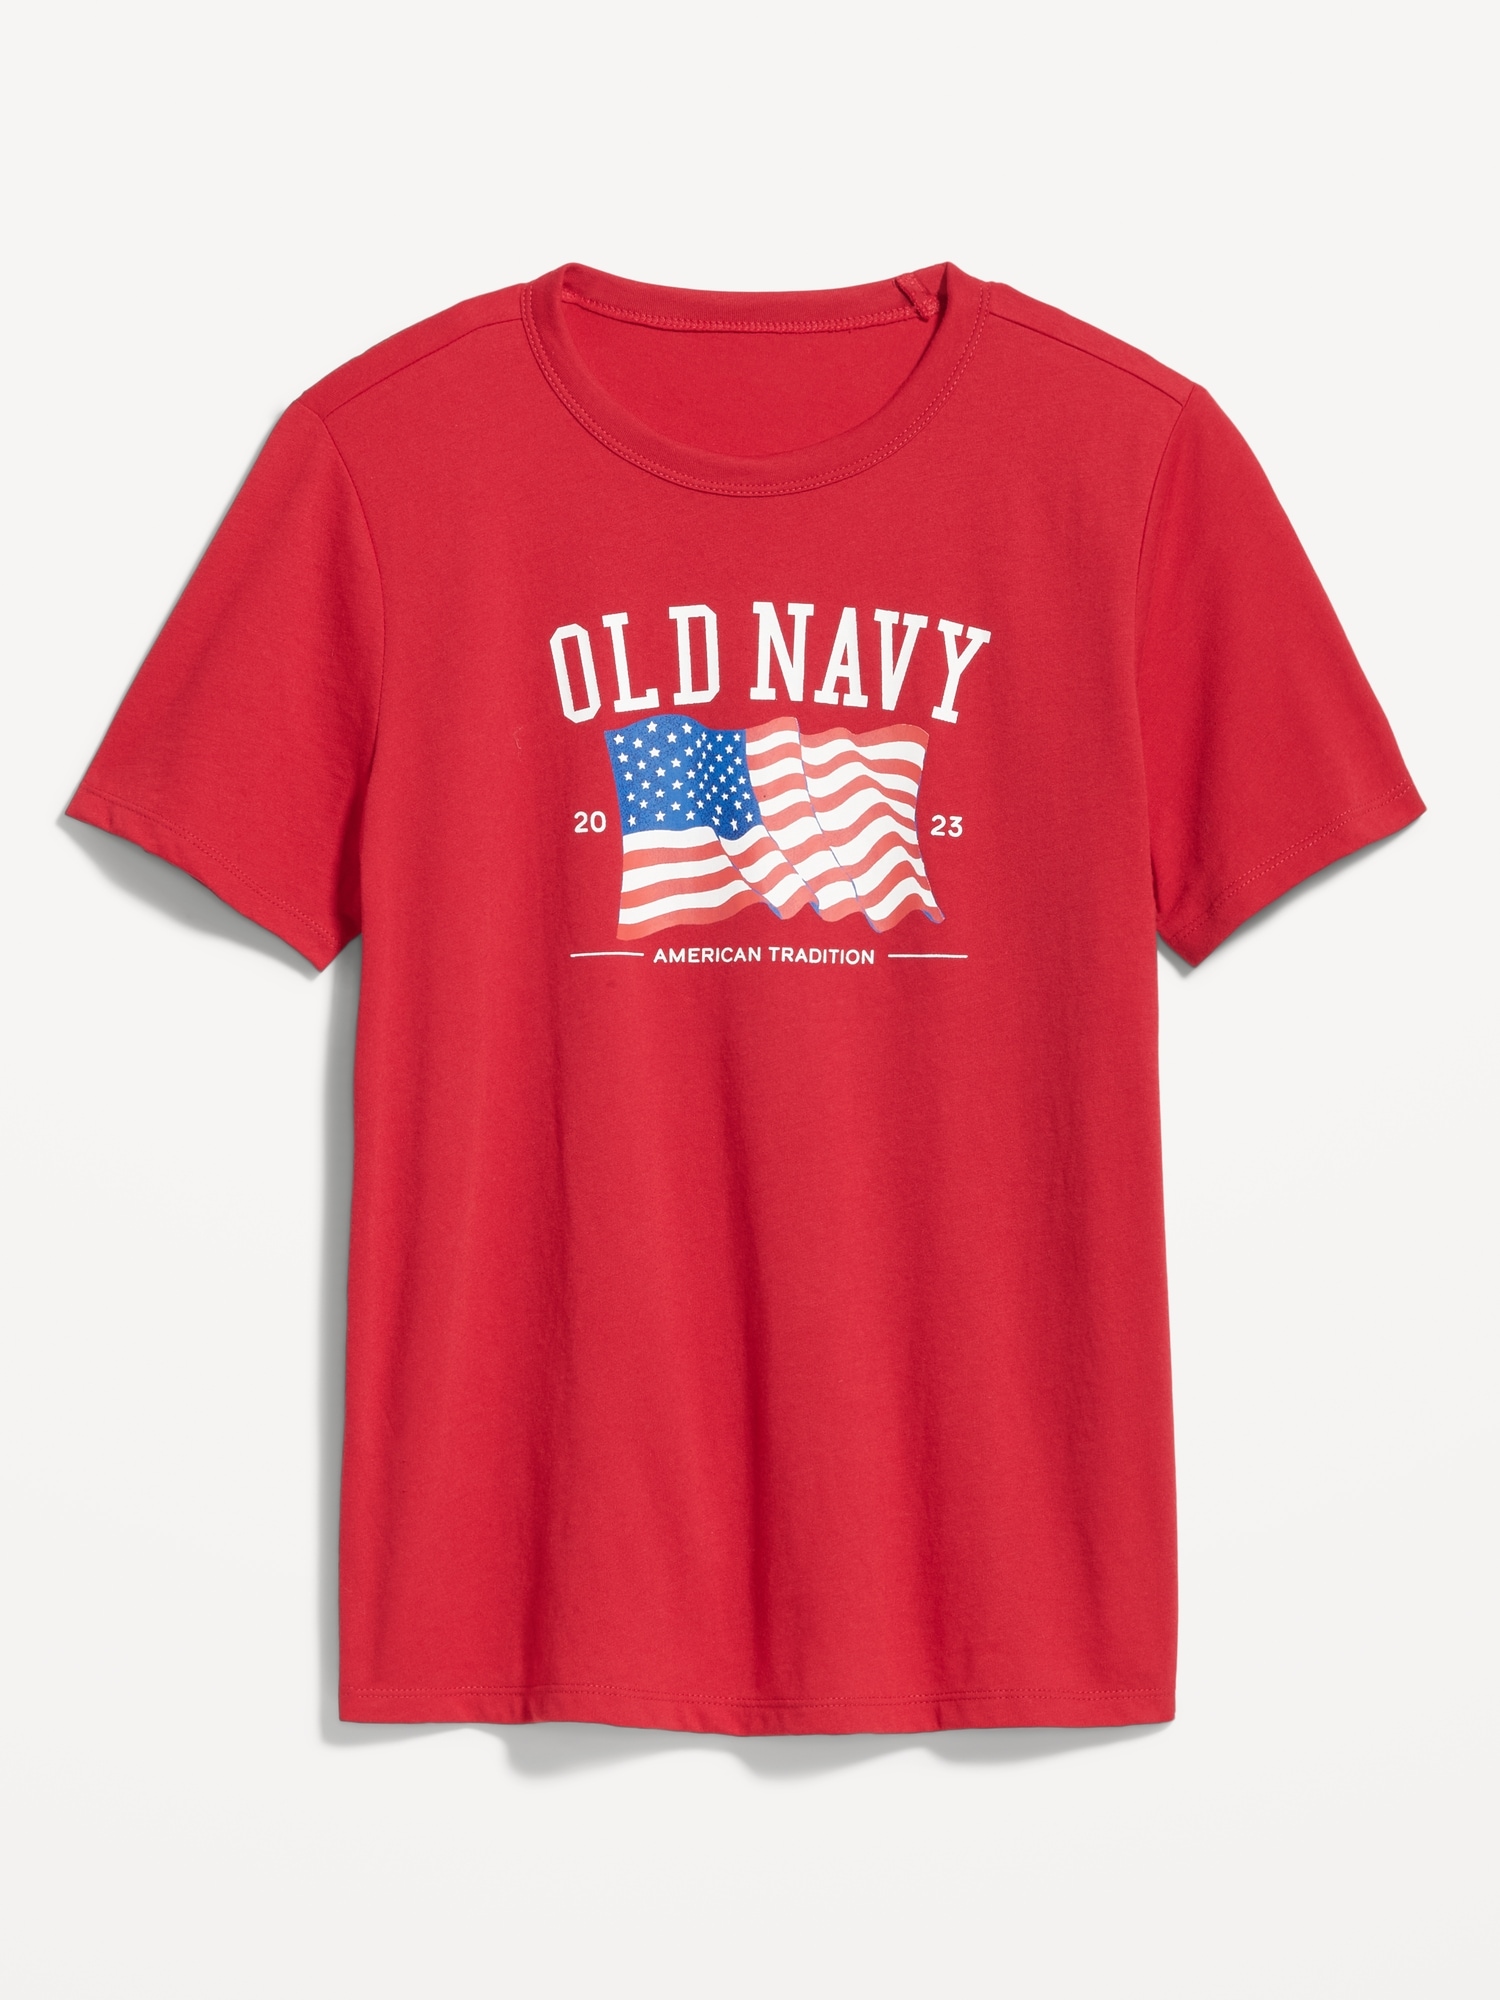 Old Navy Matching "Old Navy" Flag T-Shirt for Women red. 1